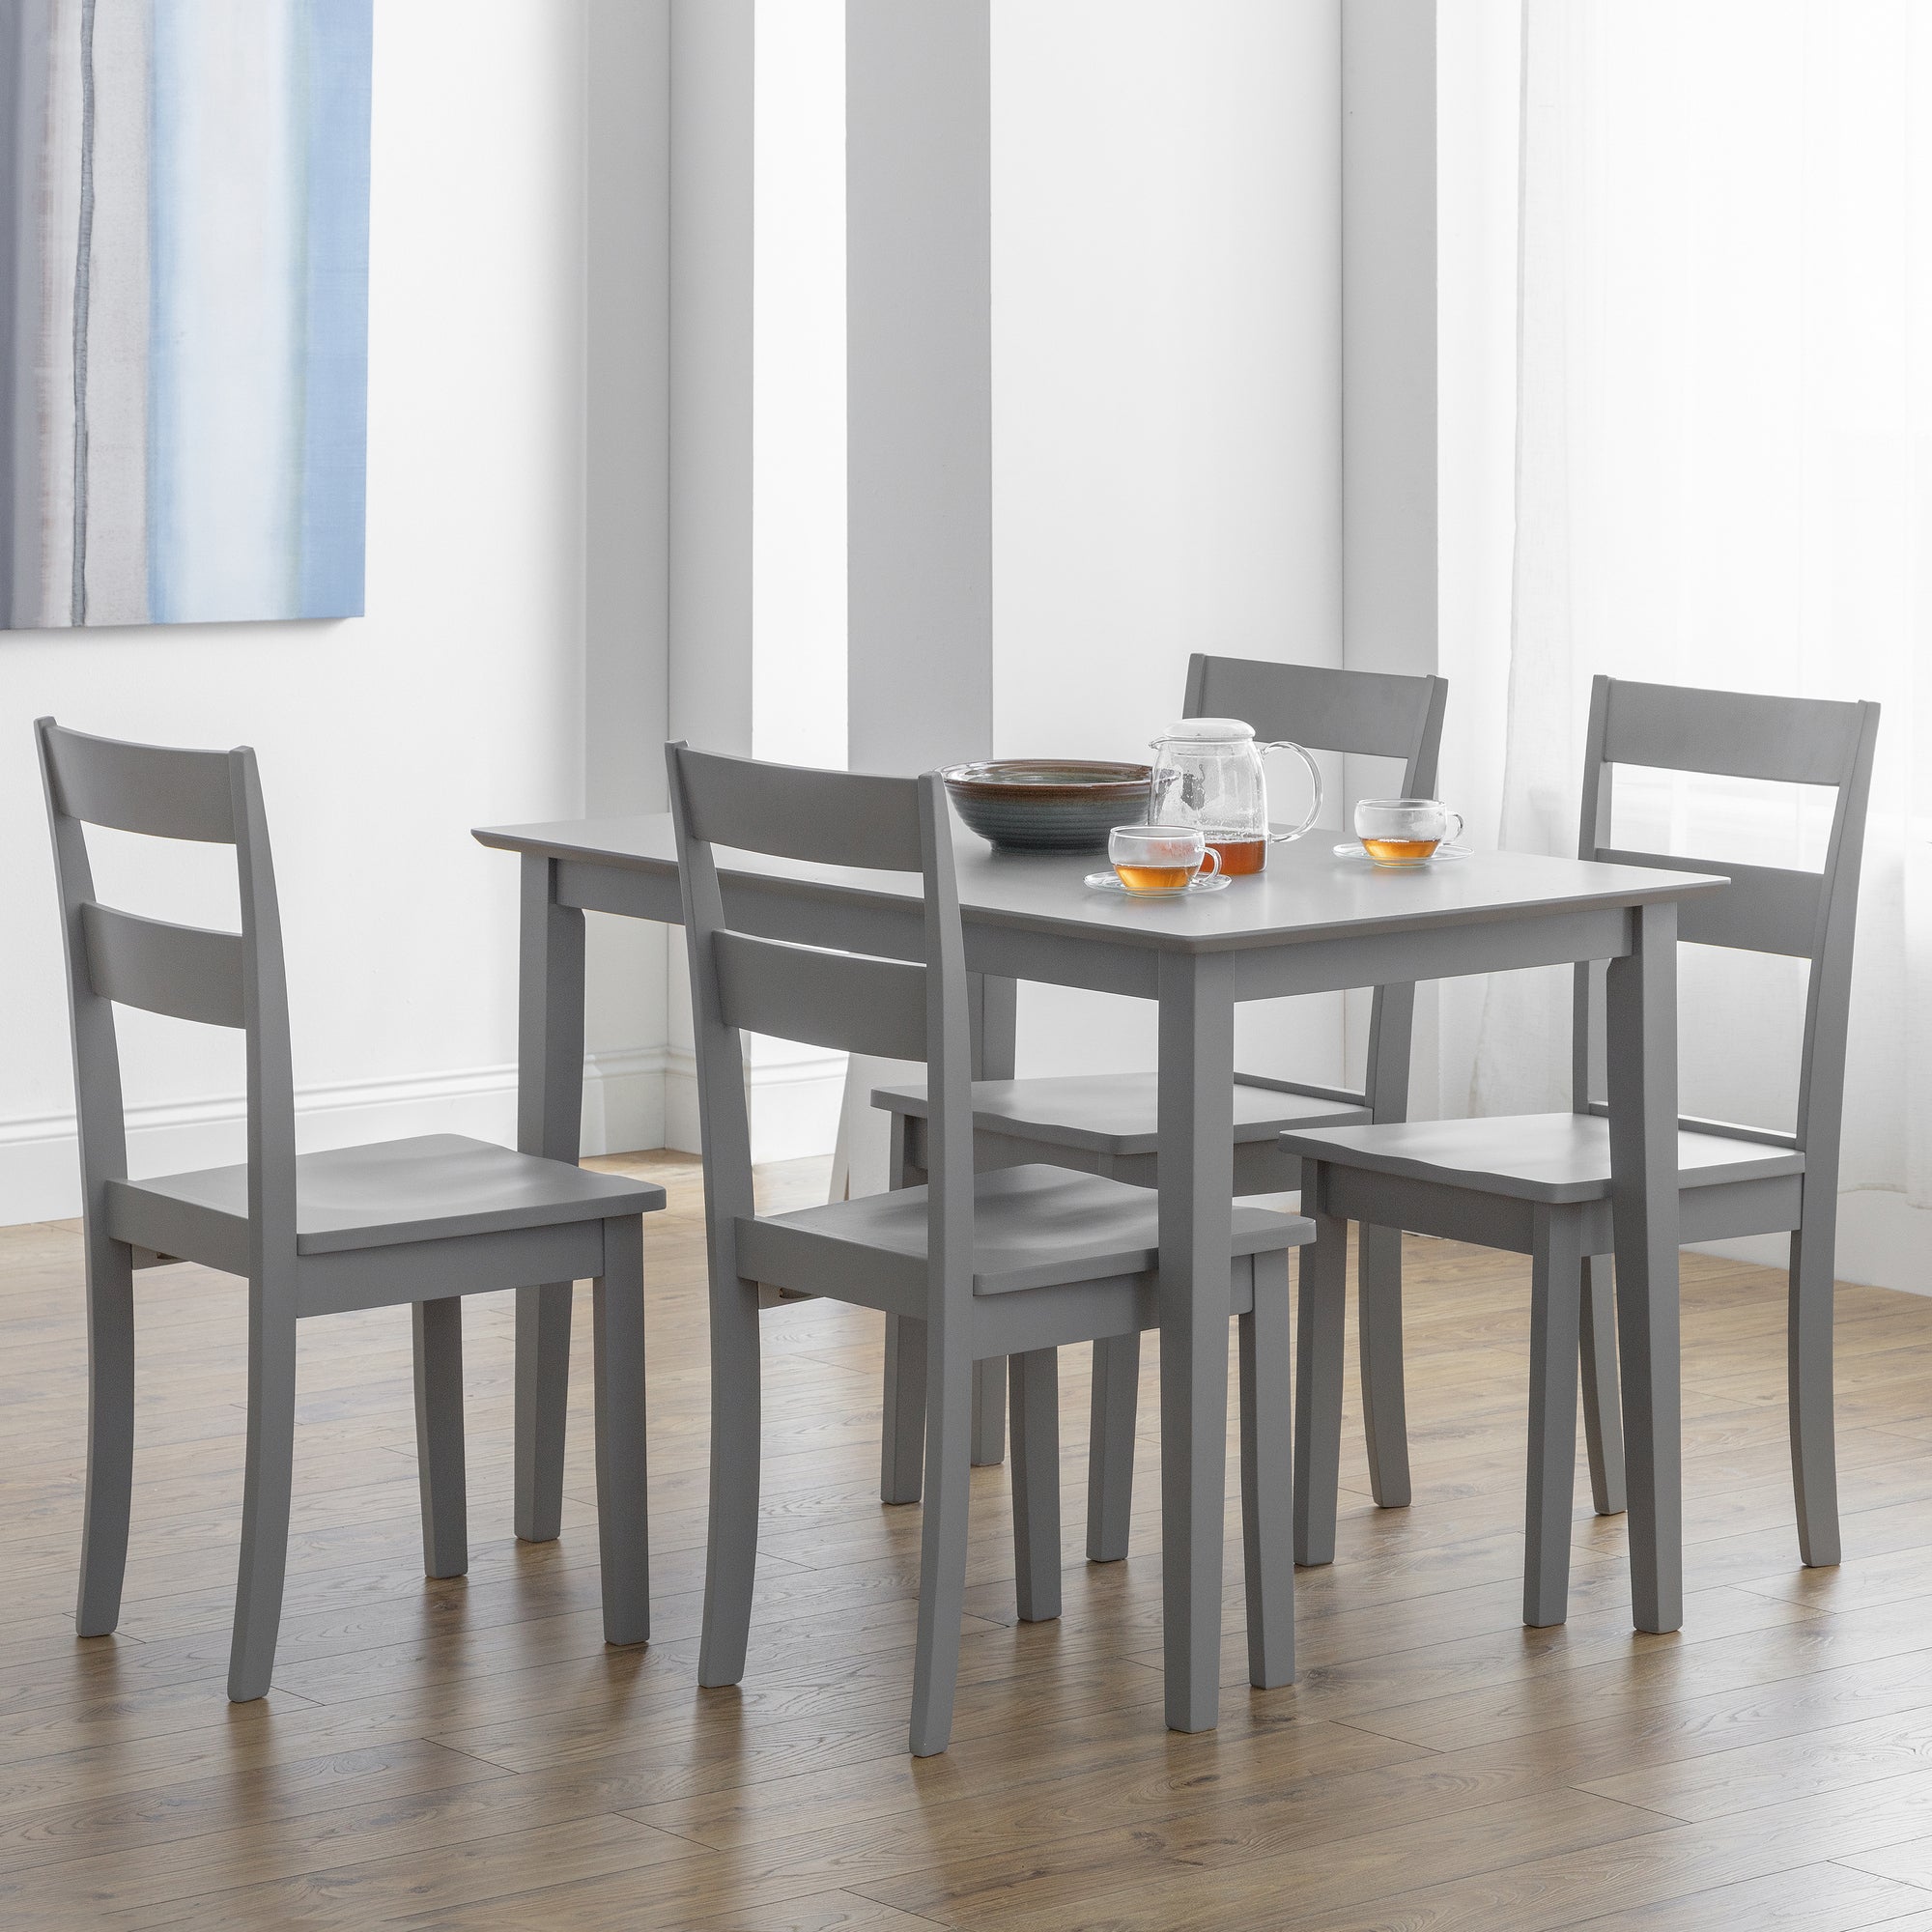 Kobe Rectangular Small Dining Table With 4 Chairs Grey Grey